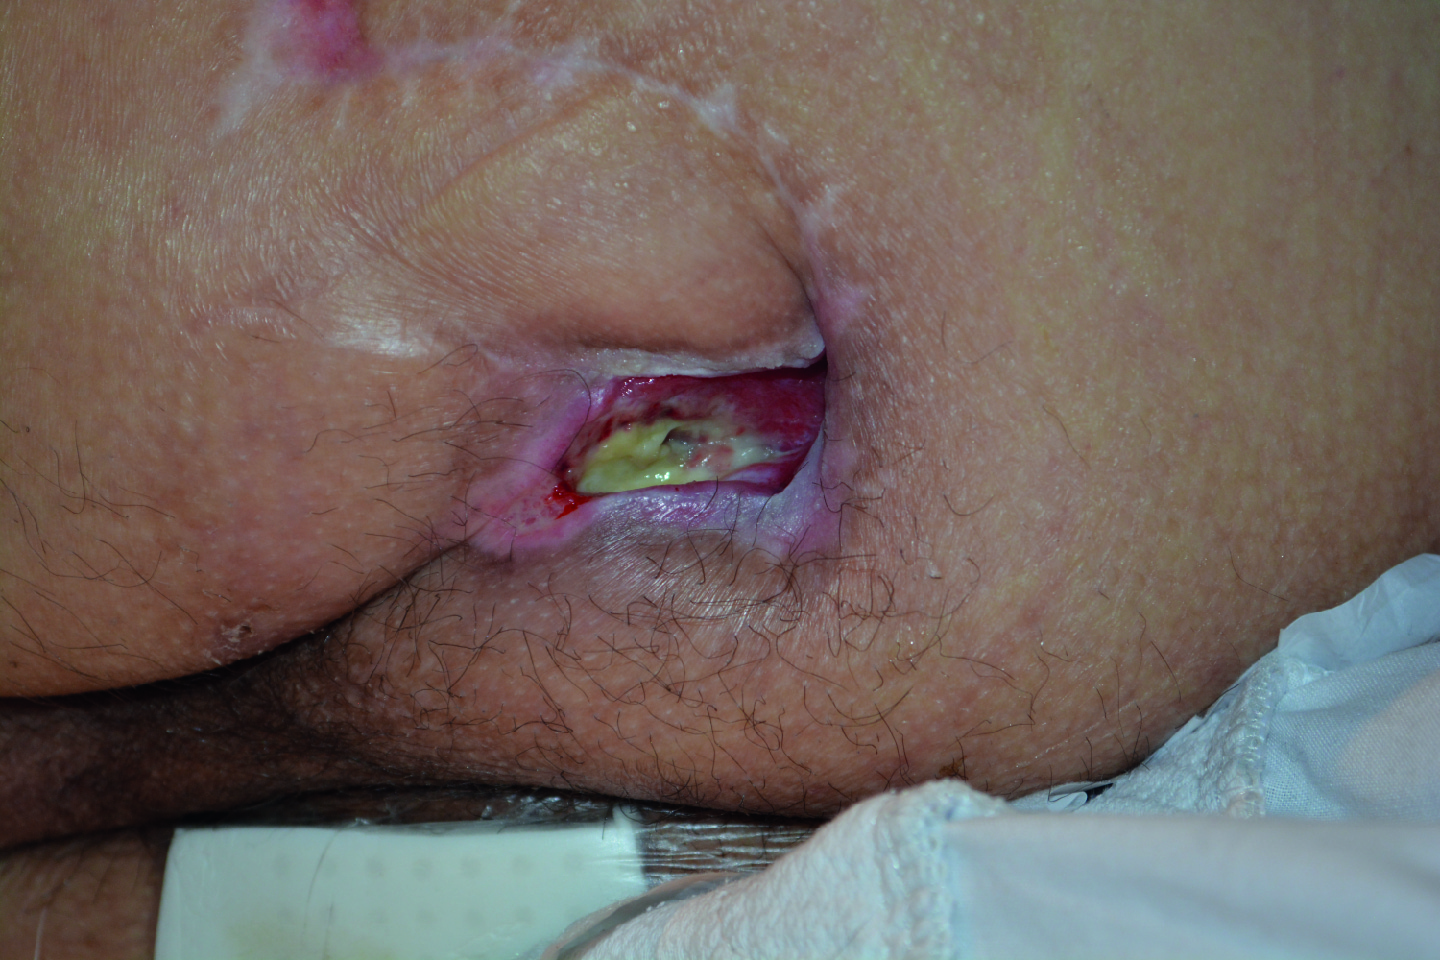 Treatment of recurring pressure ulcer over the left ischium with a silicone foam dressing